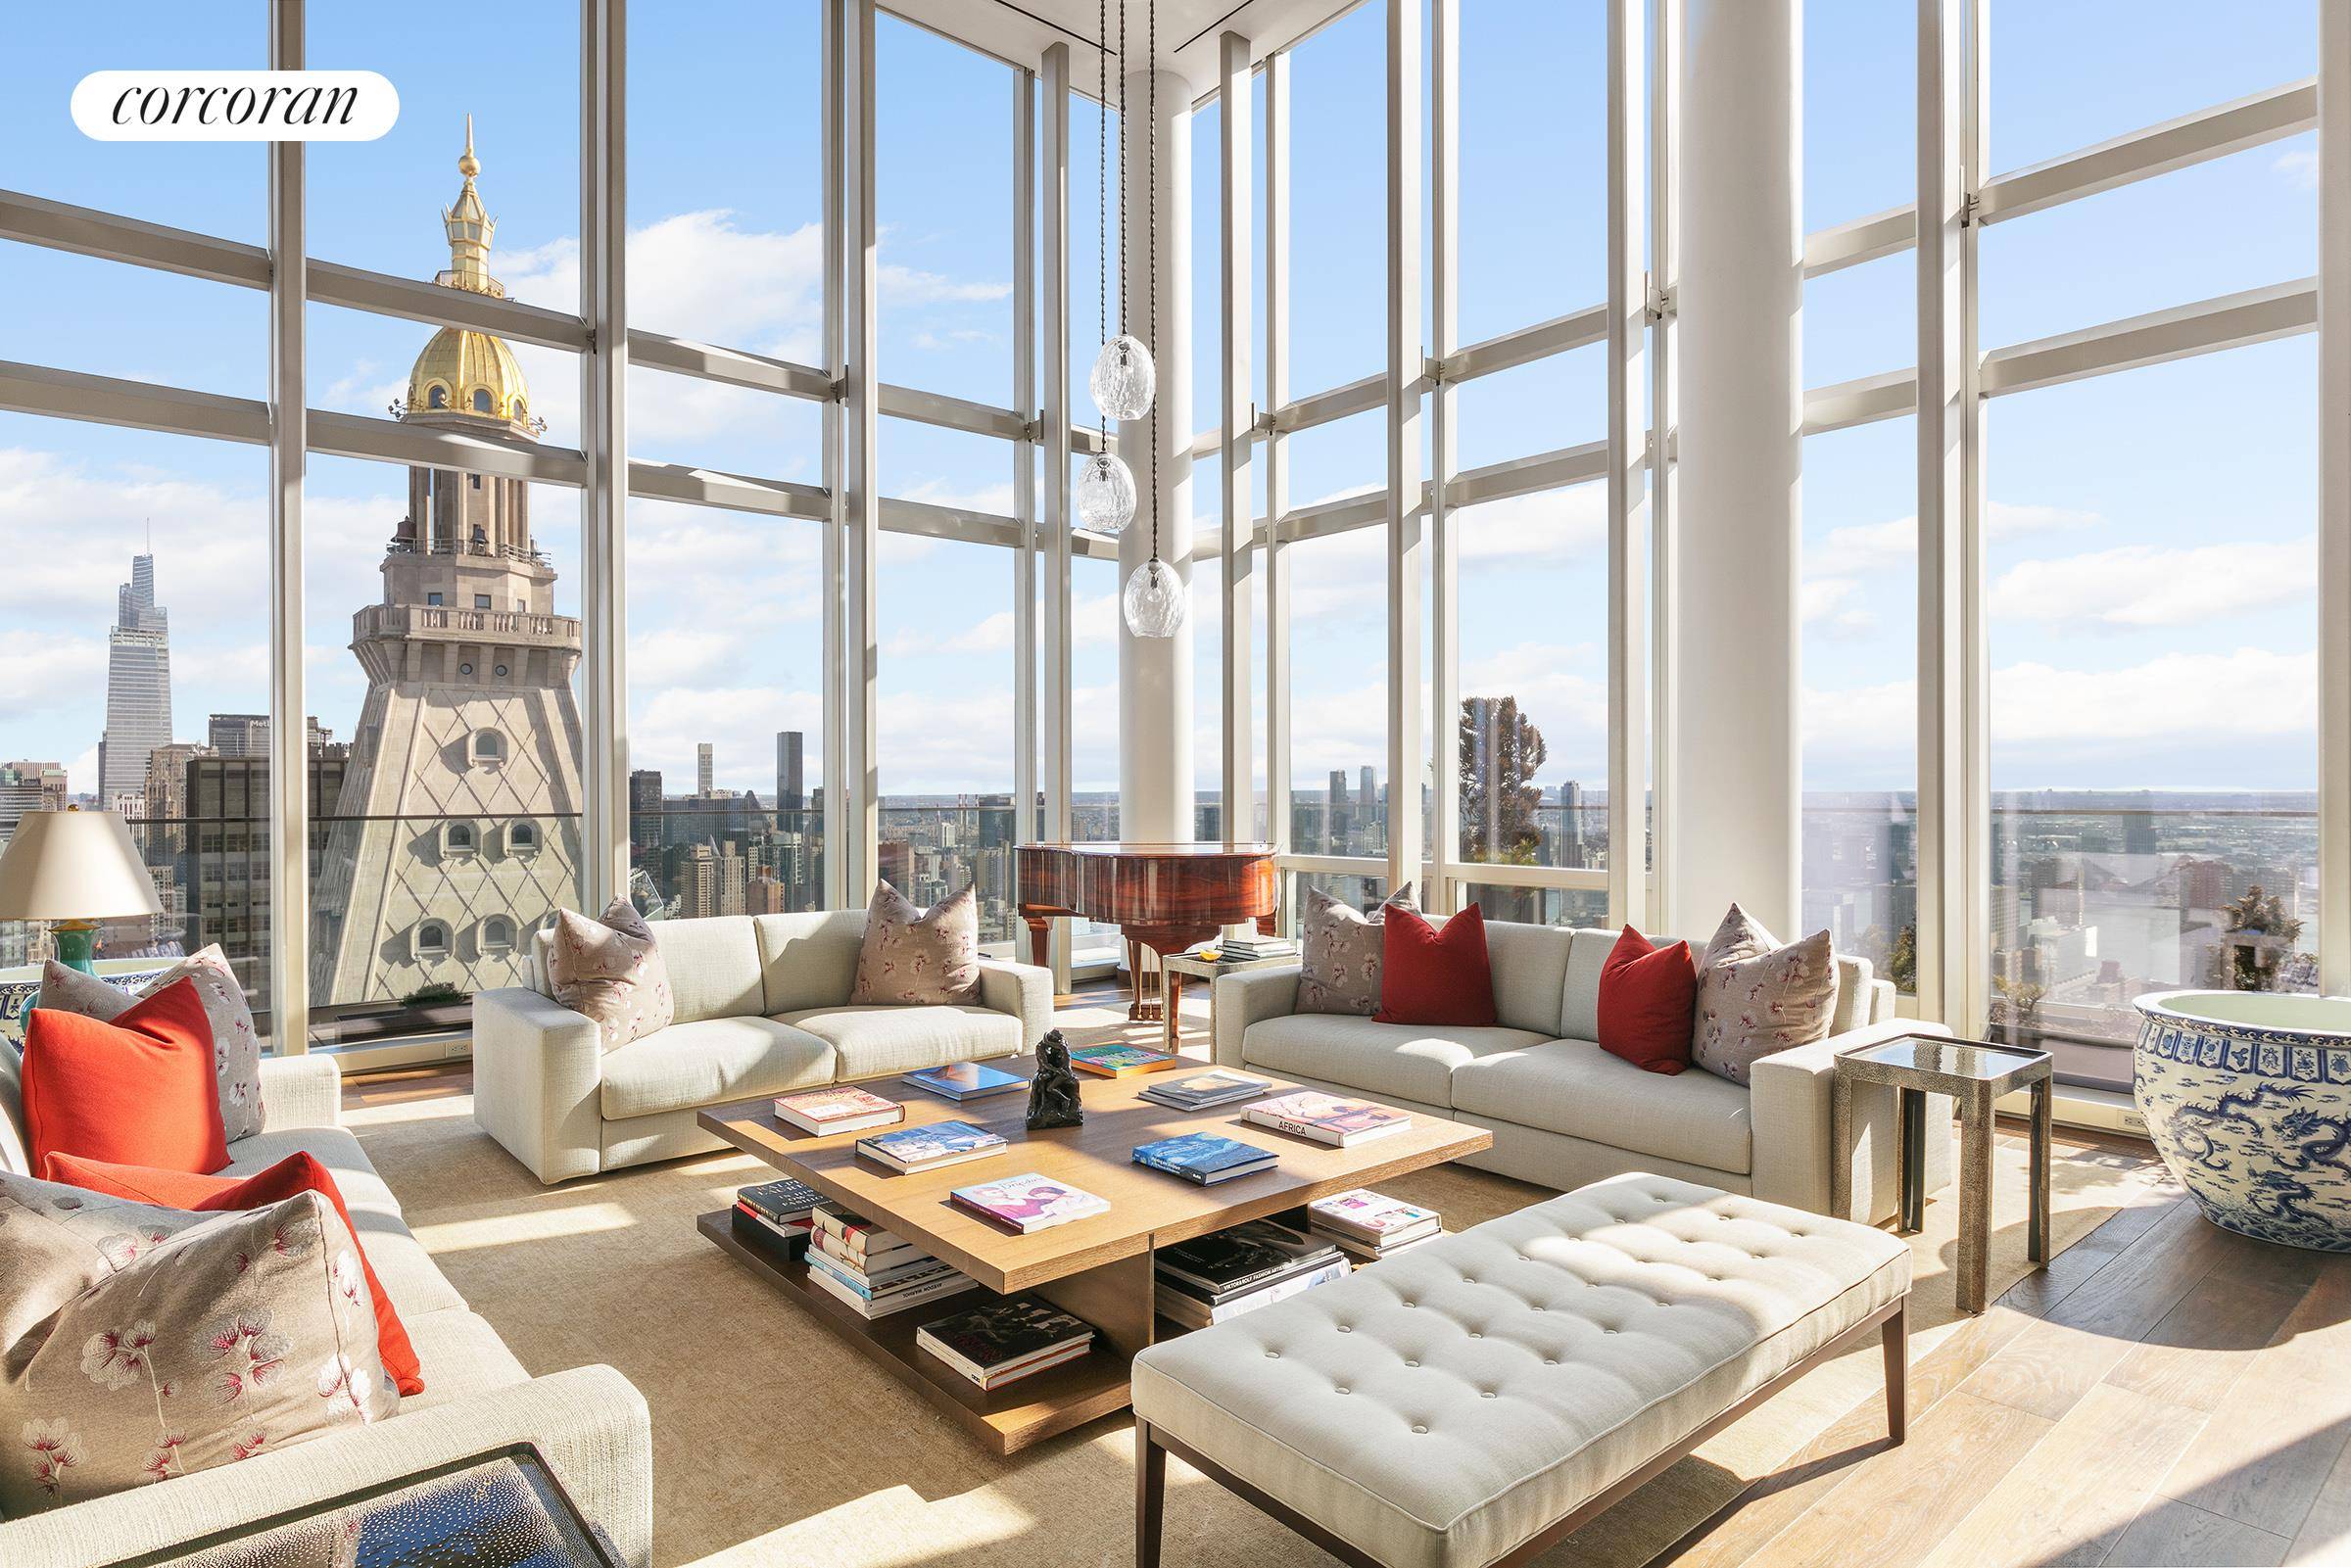 Crowning One Madison from the 58th to the 60th floors, the Triplex Penthouse boasts nearly 7, 000 square feet of open interior space with dramatic full height windows that offer ...